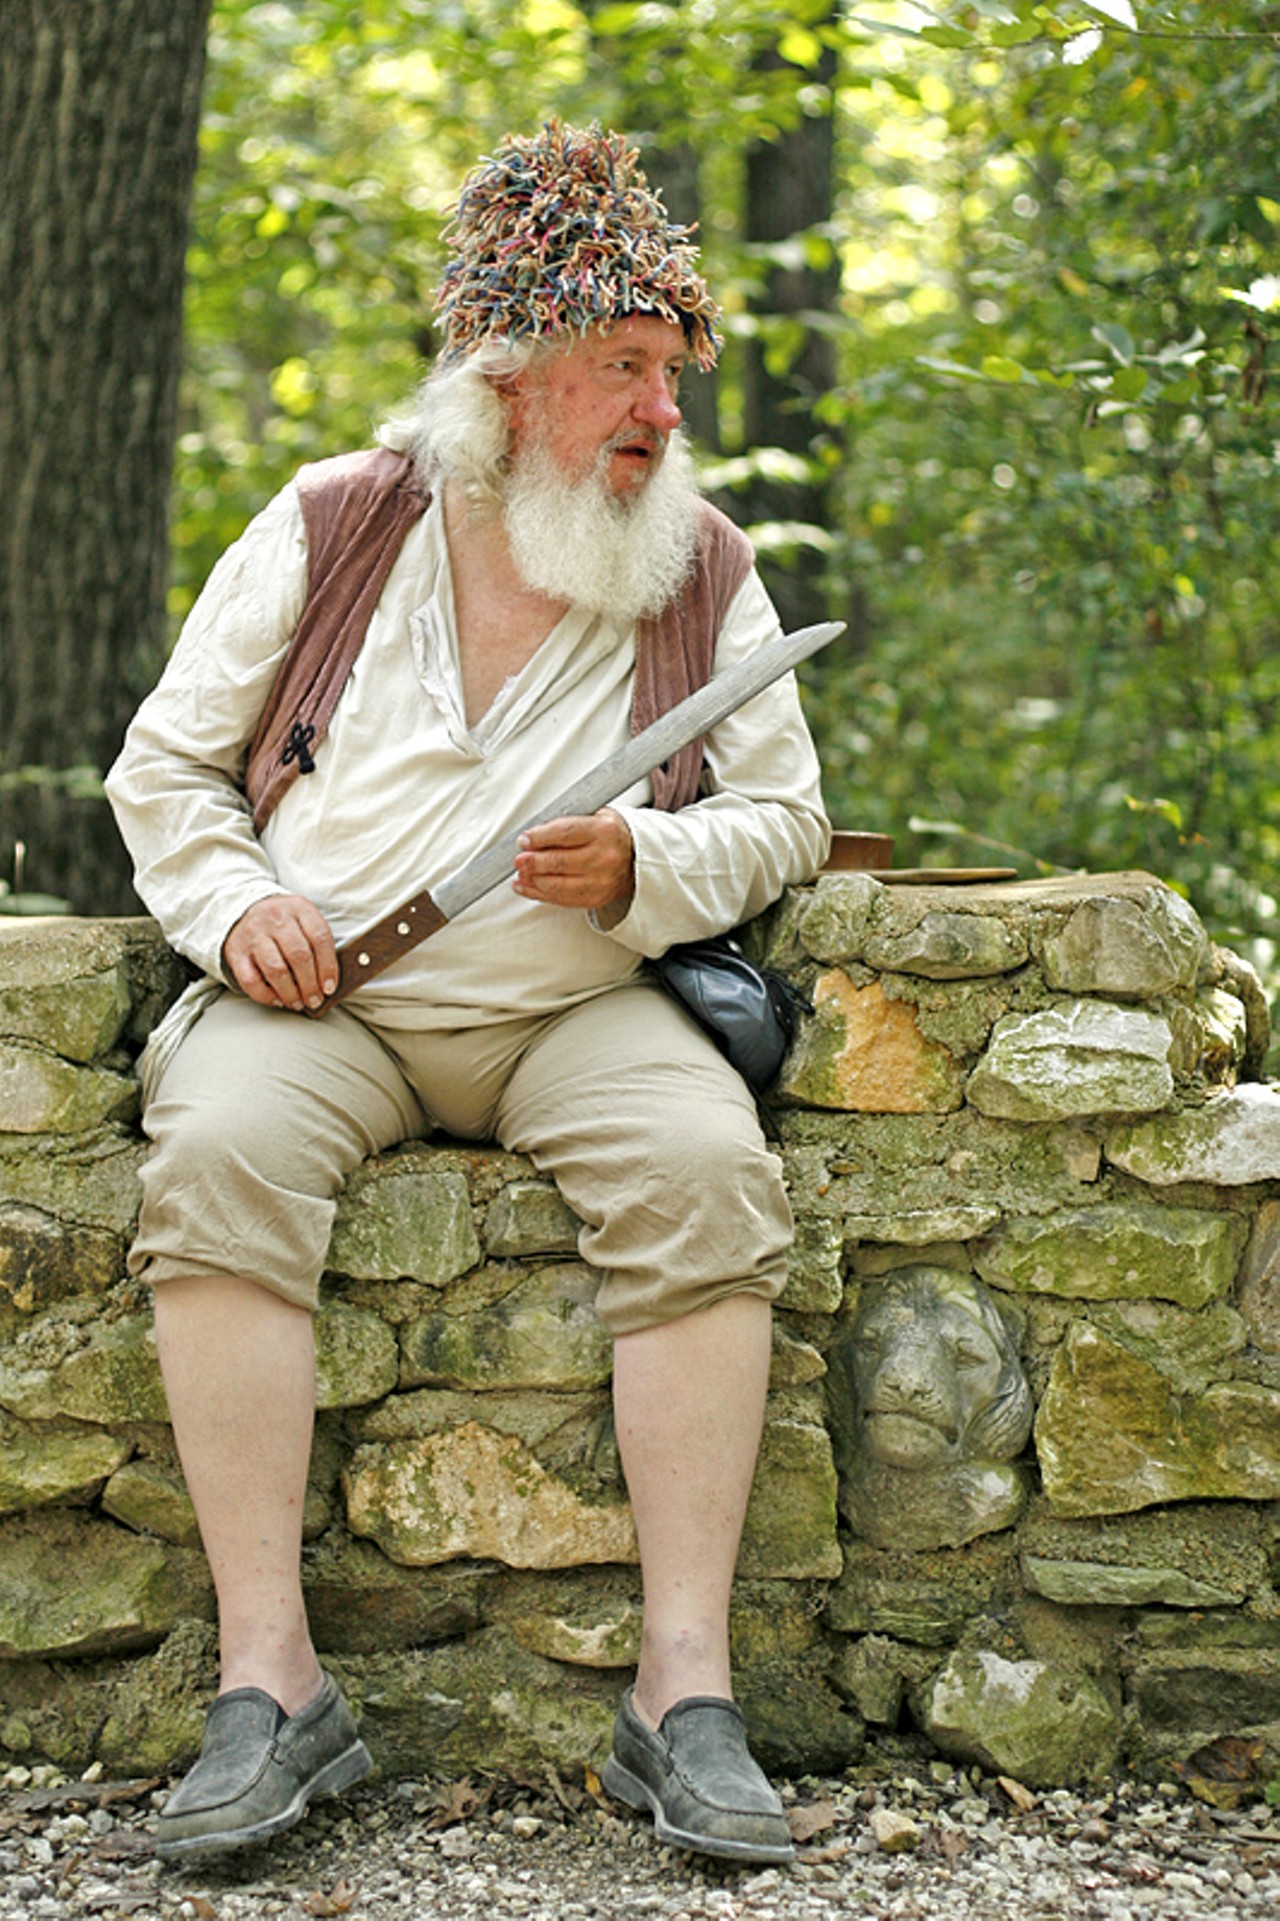 John Rochard, carpenter of the pirate ship, sits on a rock wall watching out for the "real" pirates, or the English men. "We're just honest working men trying to make a living," Rochard said in his defense.